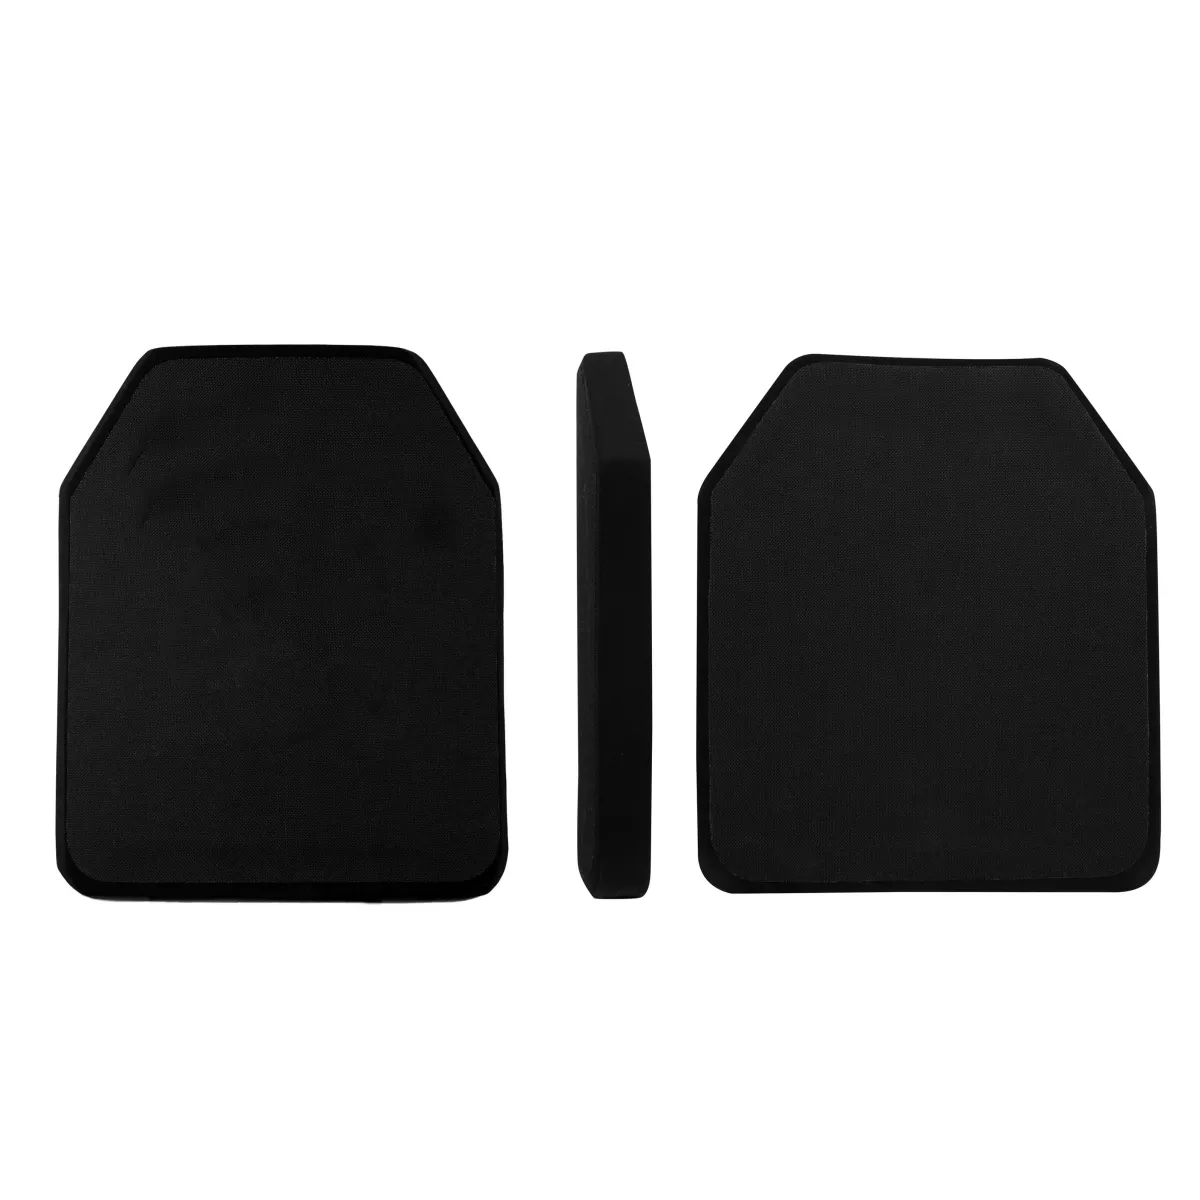 Hard plate UHMWPE KEVLAR Ceramic Aluminium oxide carbon silicon plate For Tactical Plate Carrier Vest